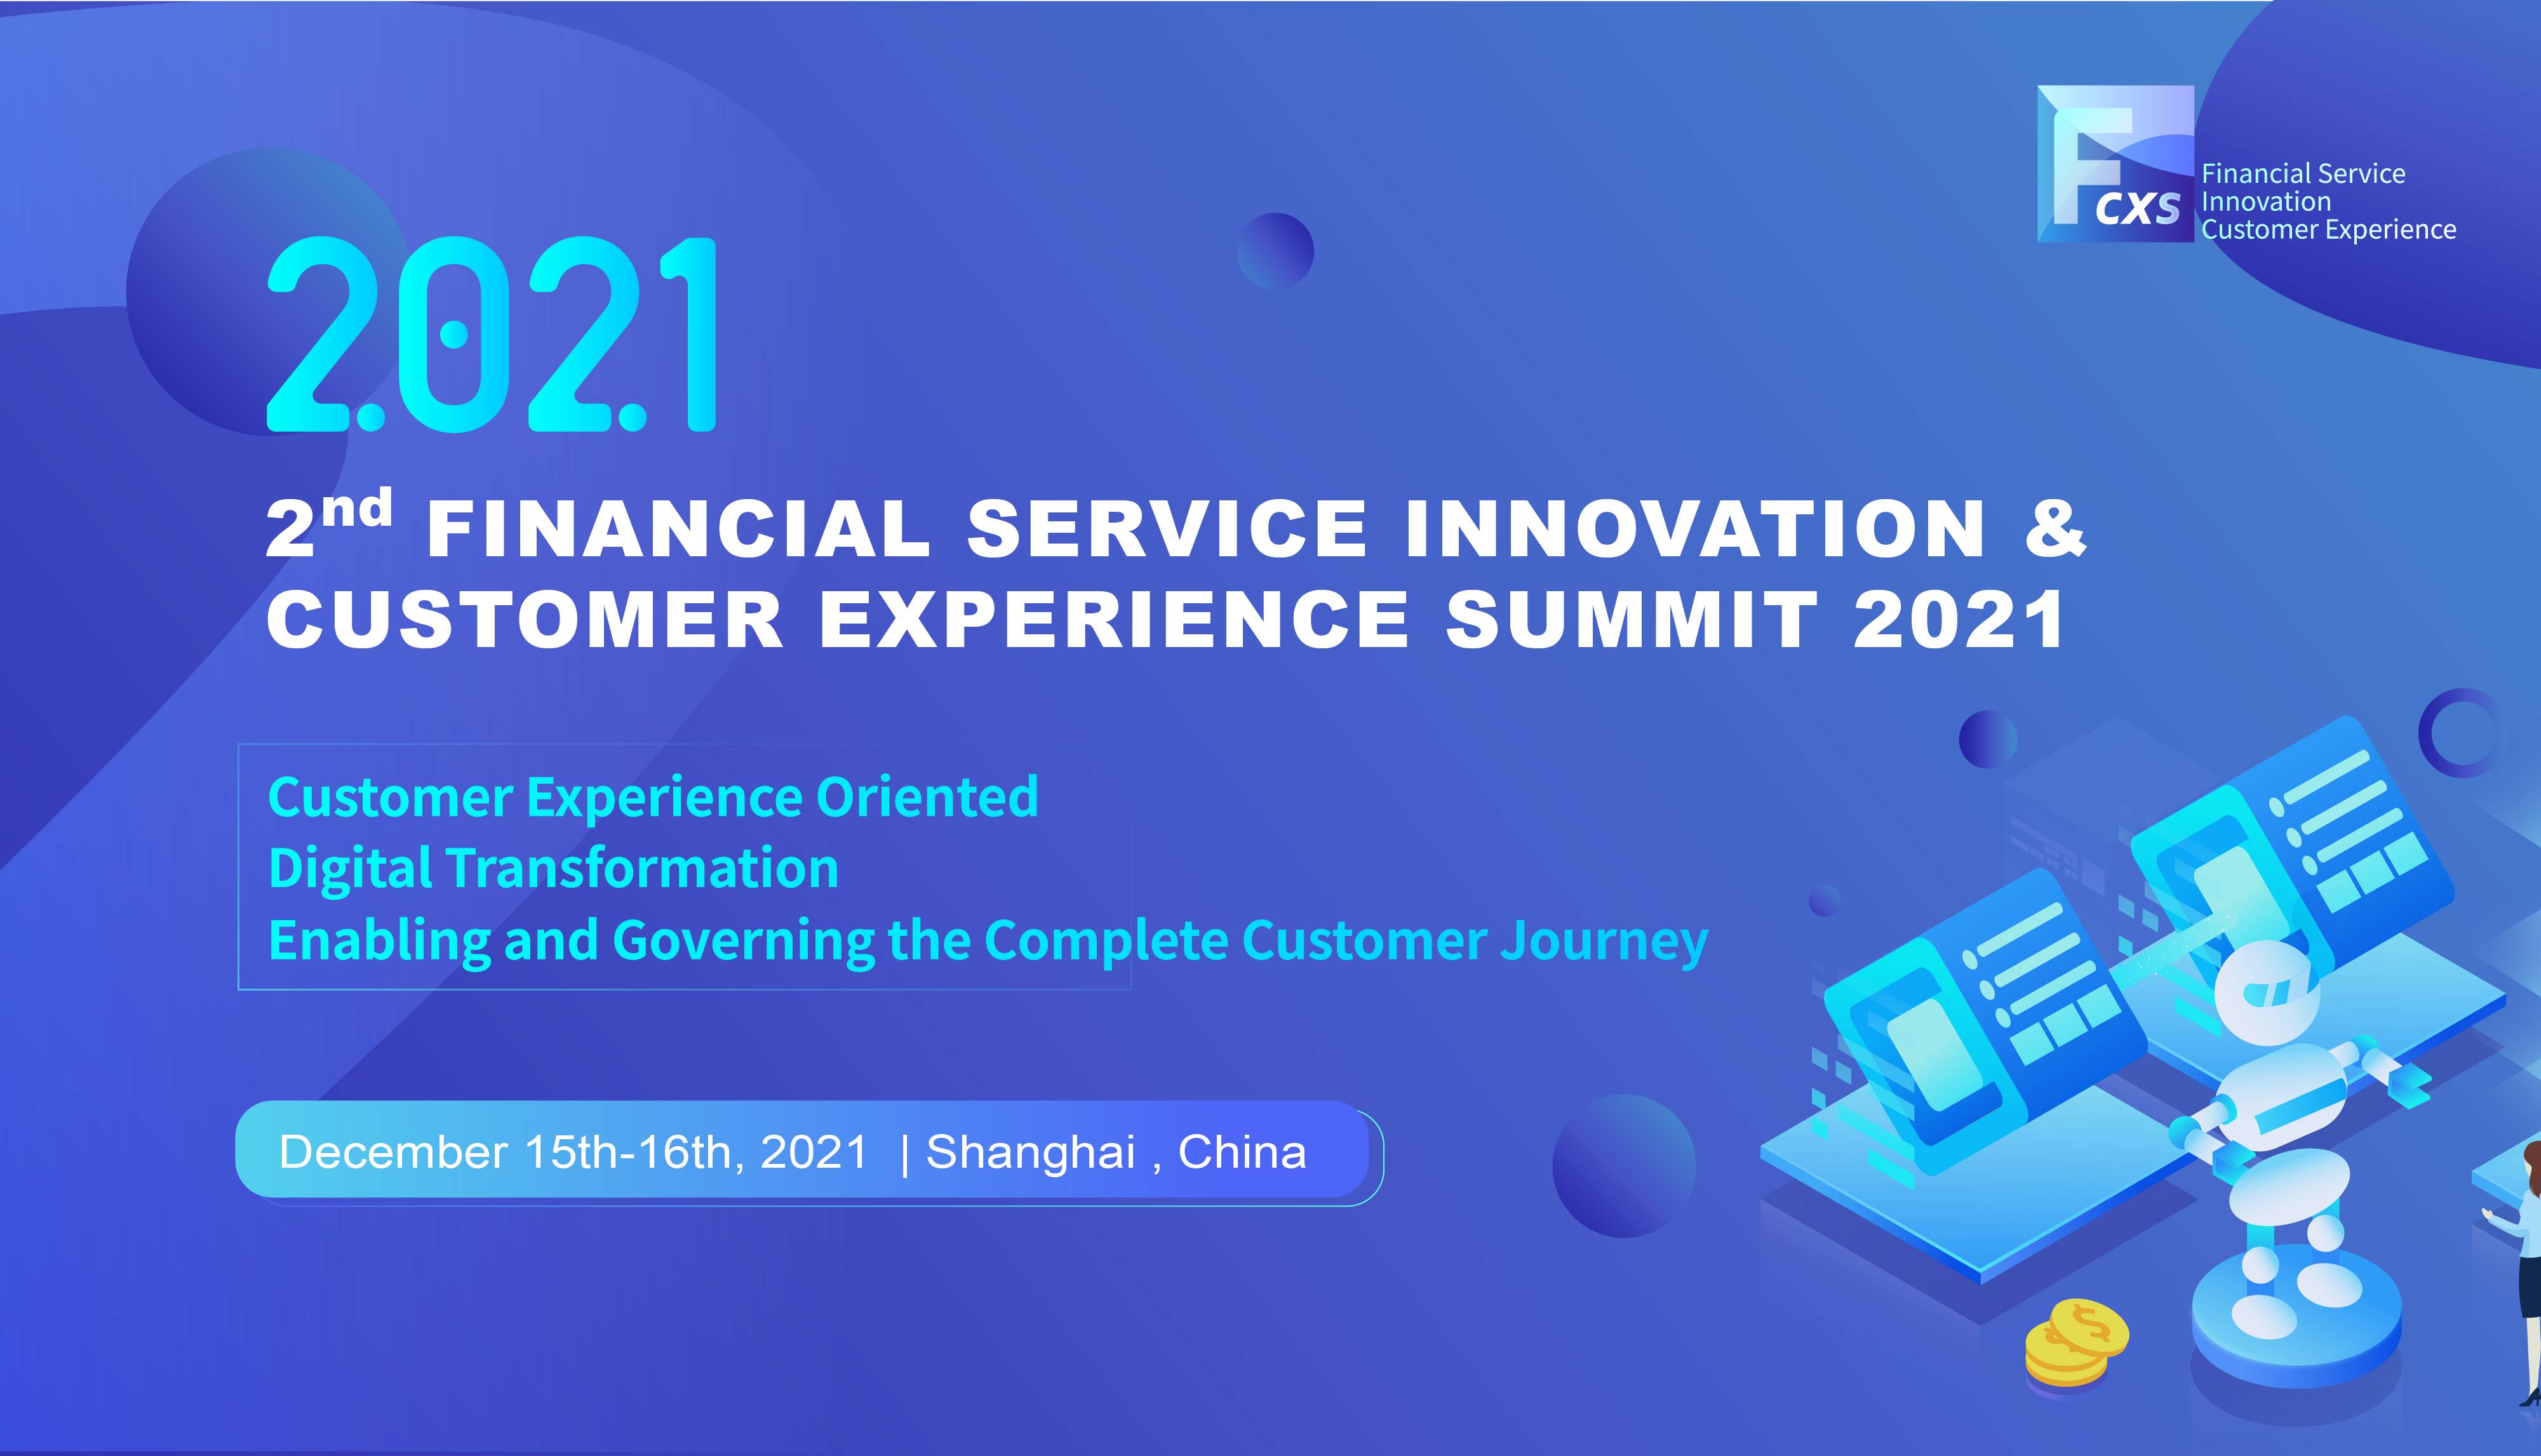 The 2nd Financial Services Innovation and Customer Experience Summit 2021